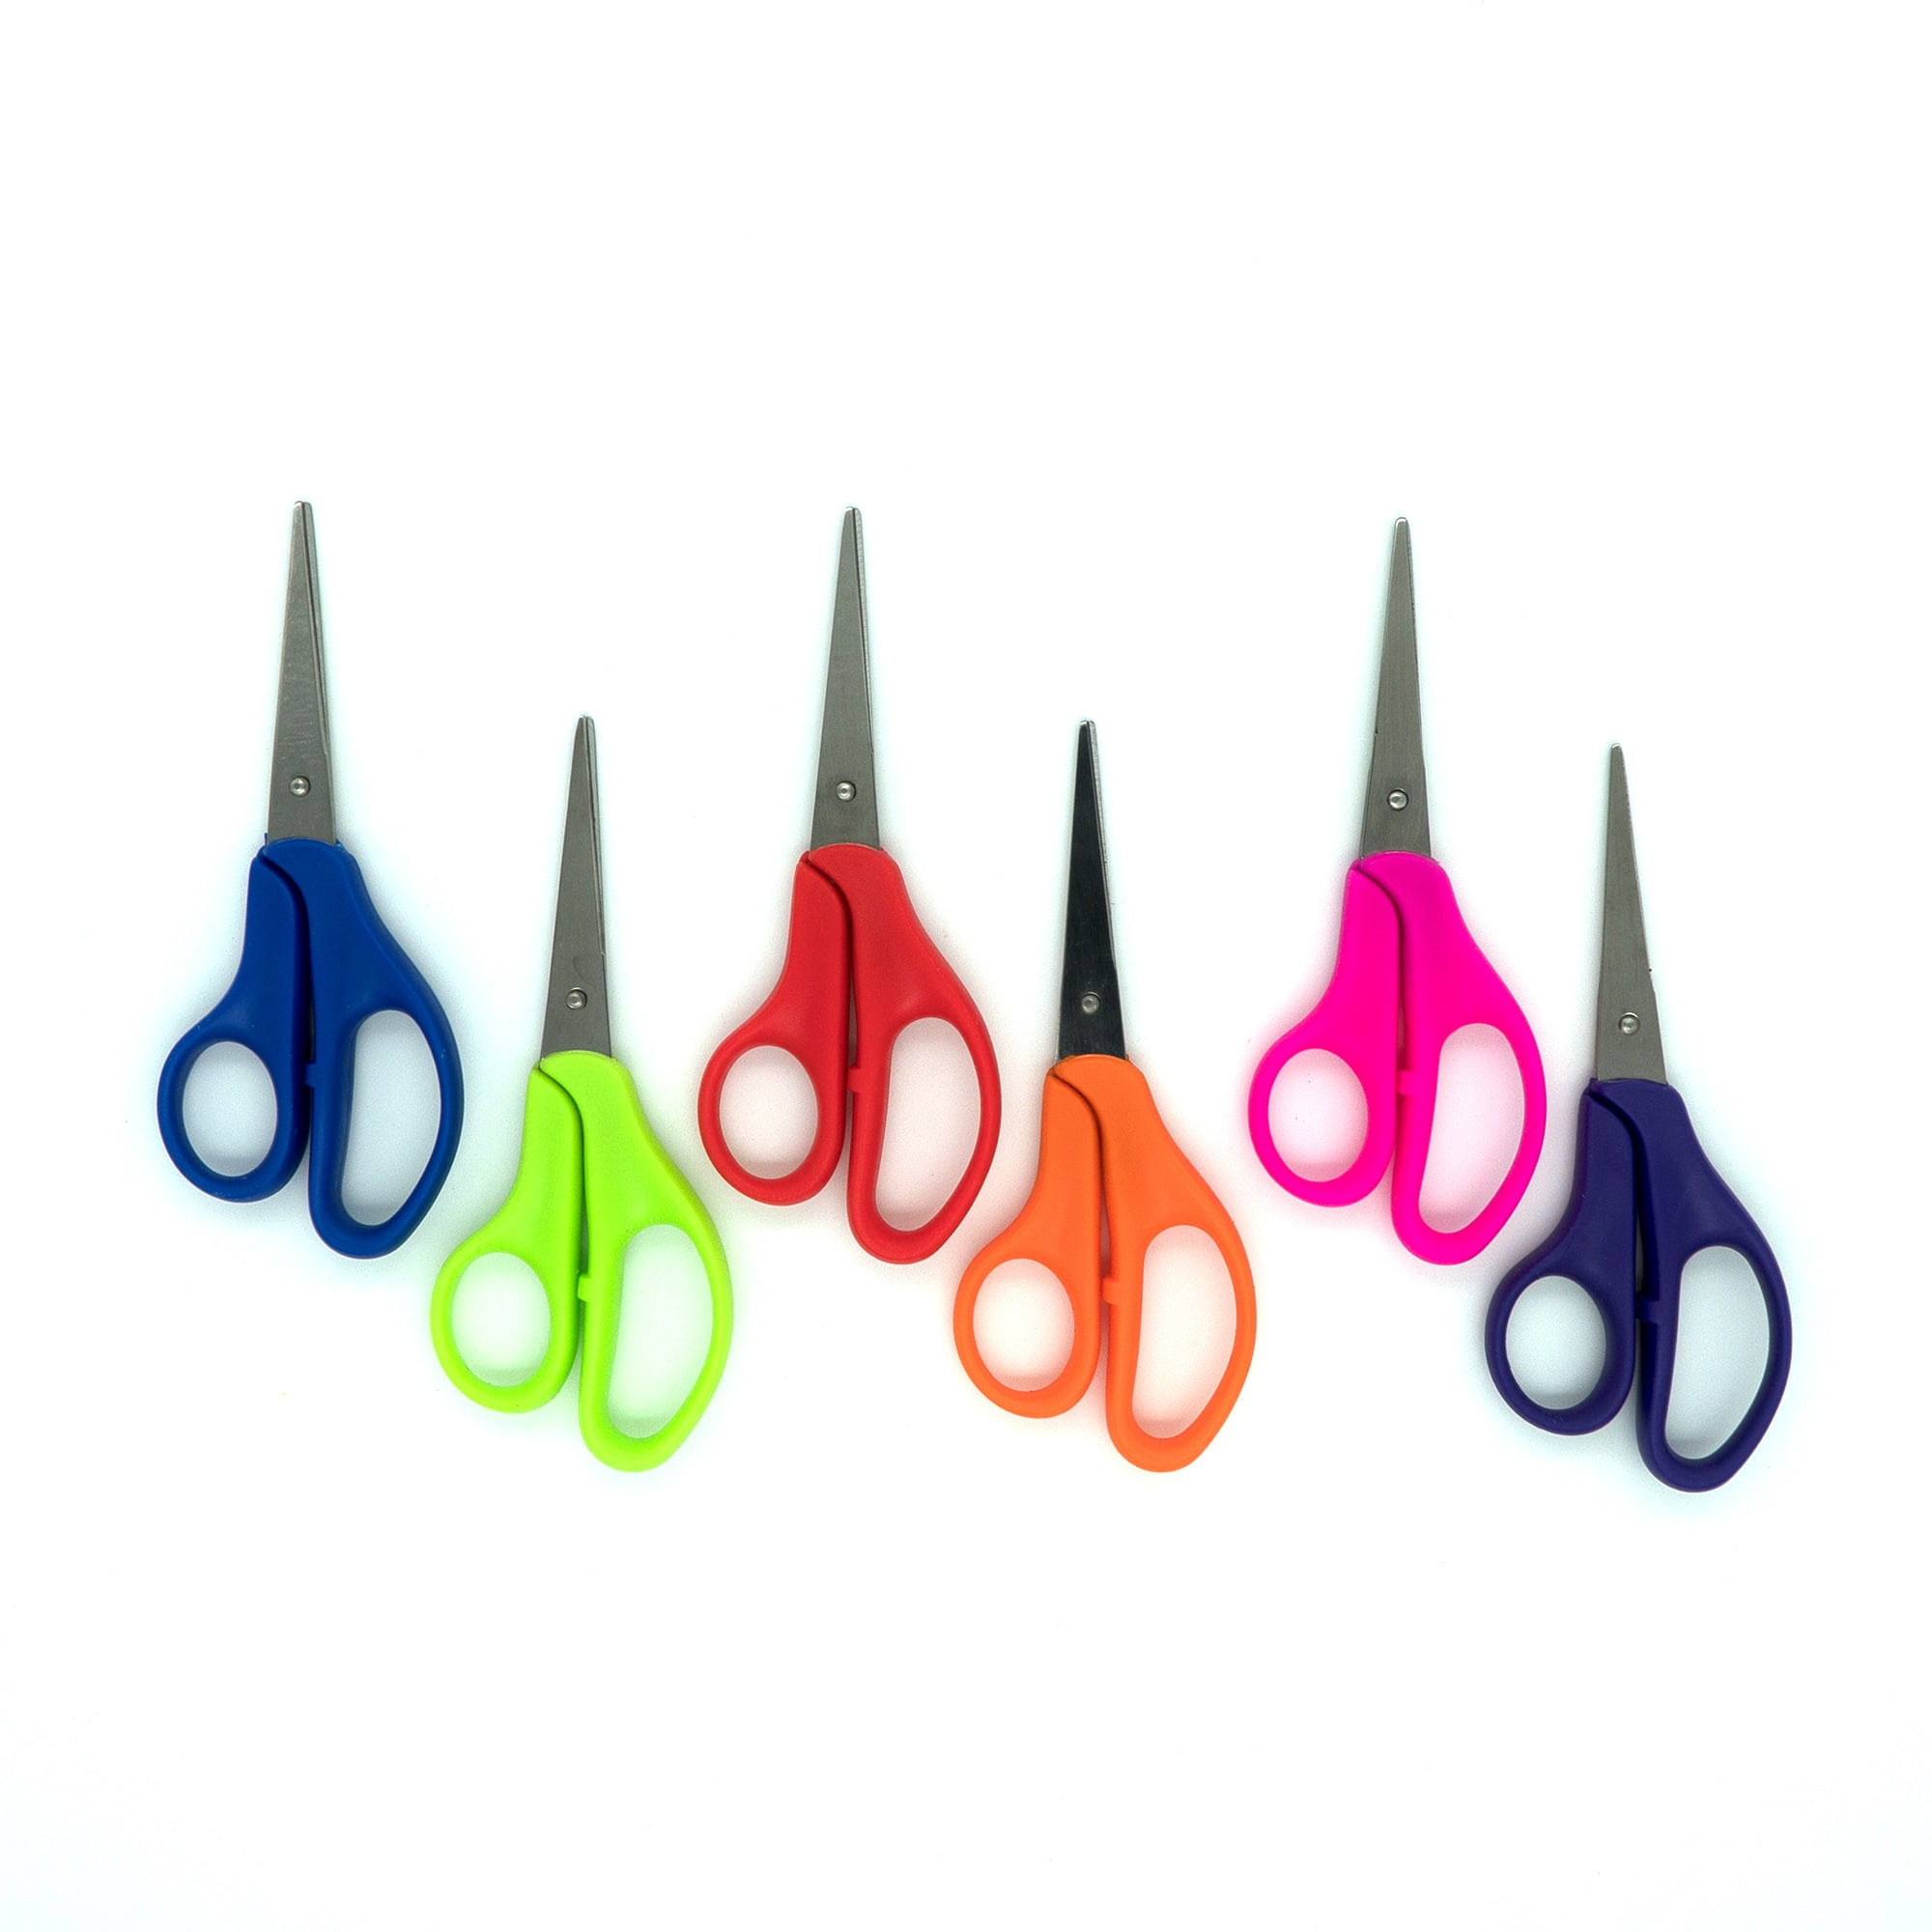 Precision Detail Paper Cutting Craft Scissors, Small Embroidery Sewing Scissors, Sharp Small Blade for Detail Cutting, Ergonomic Comfortable Handles